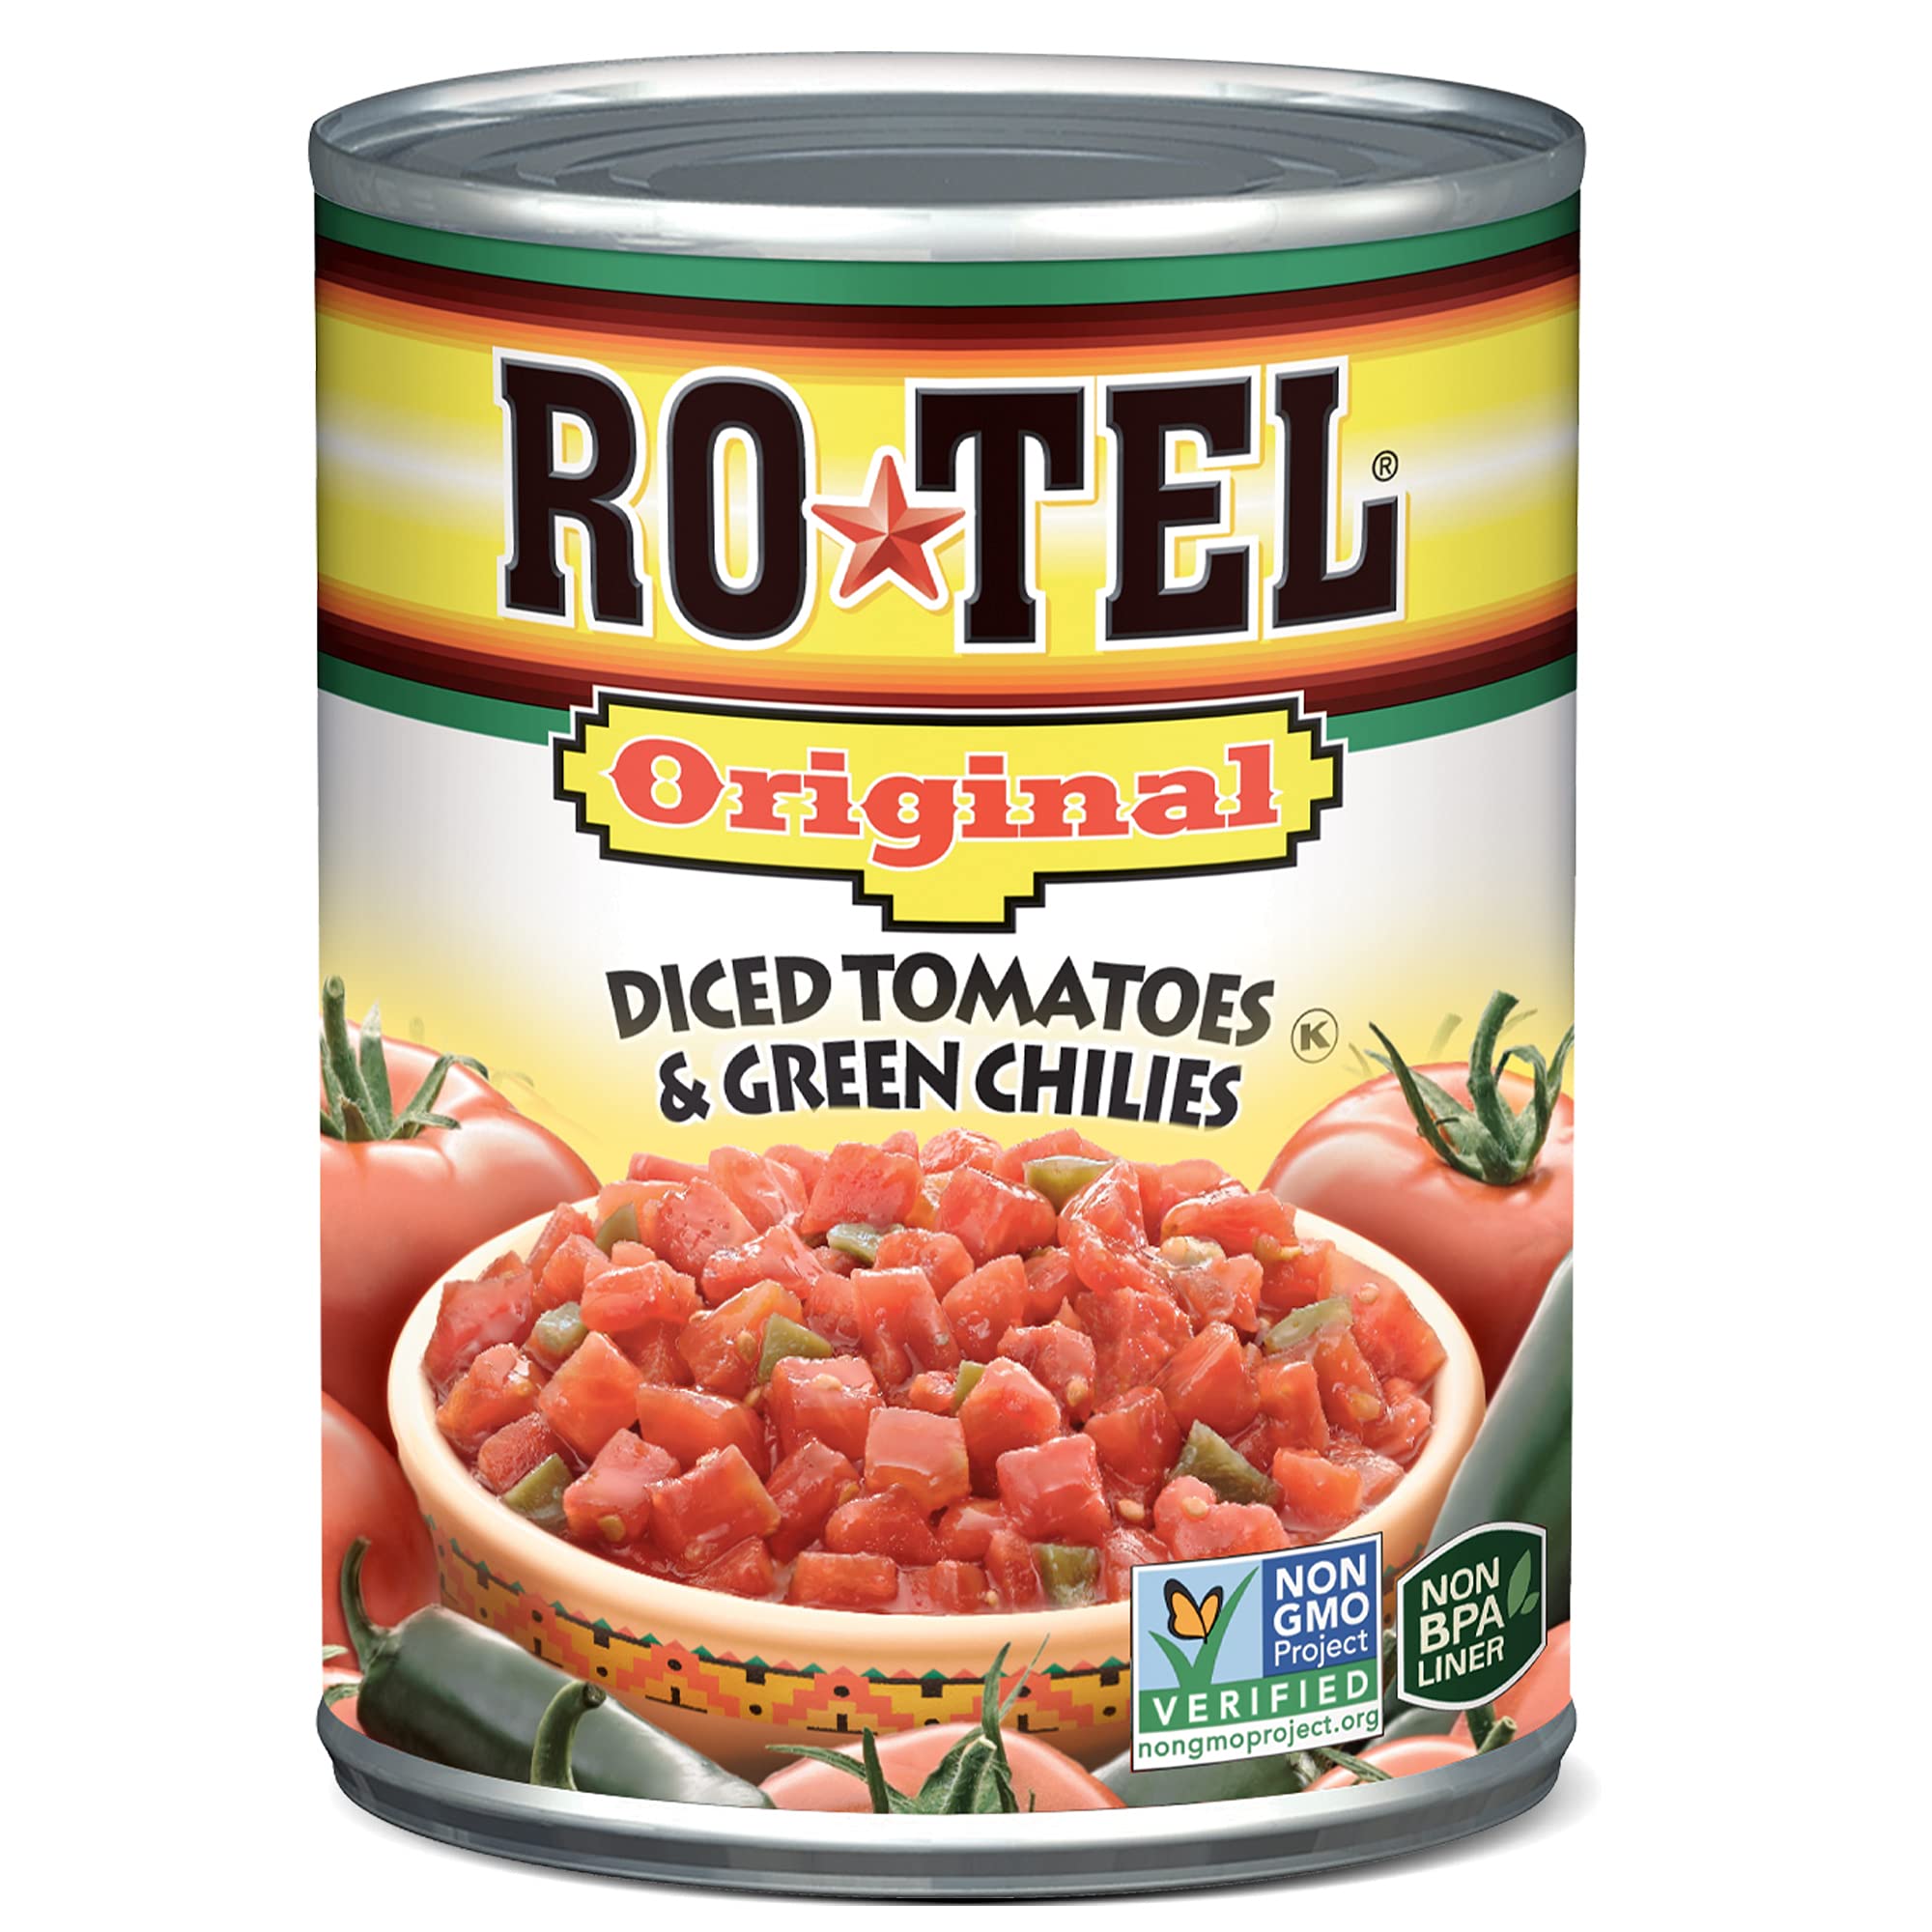 RO-TEL Diced Tomatoes & Green Chilies, 10 oz